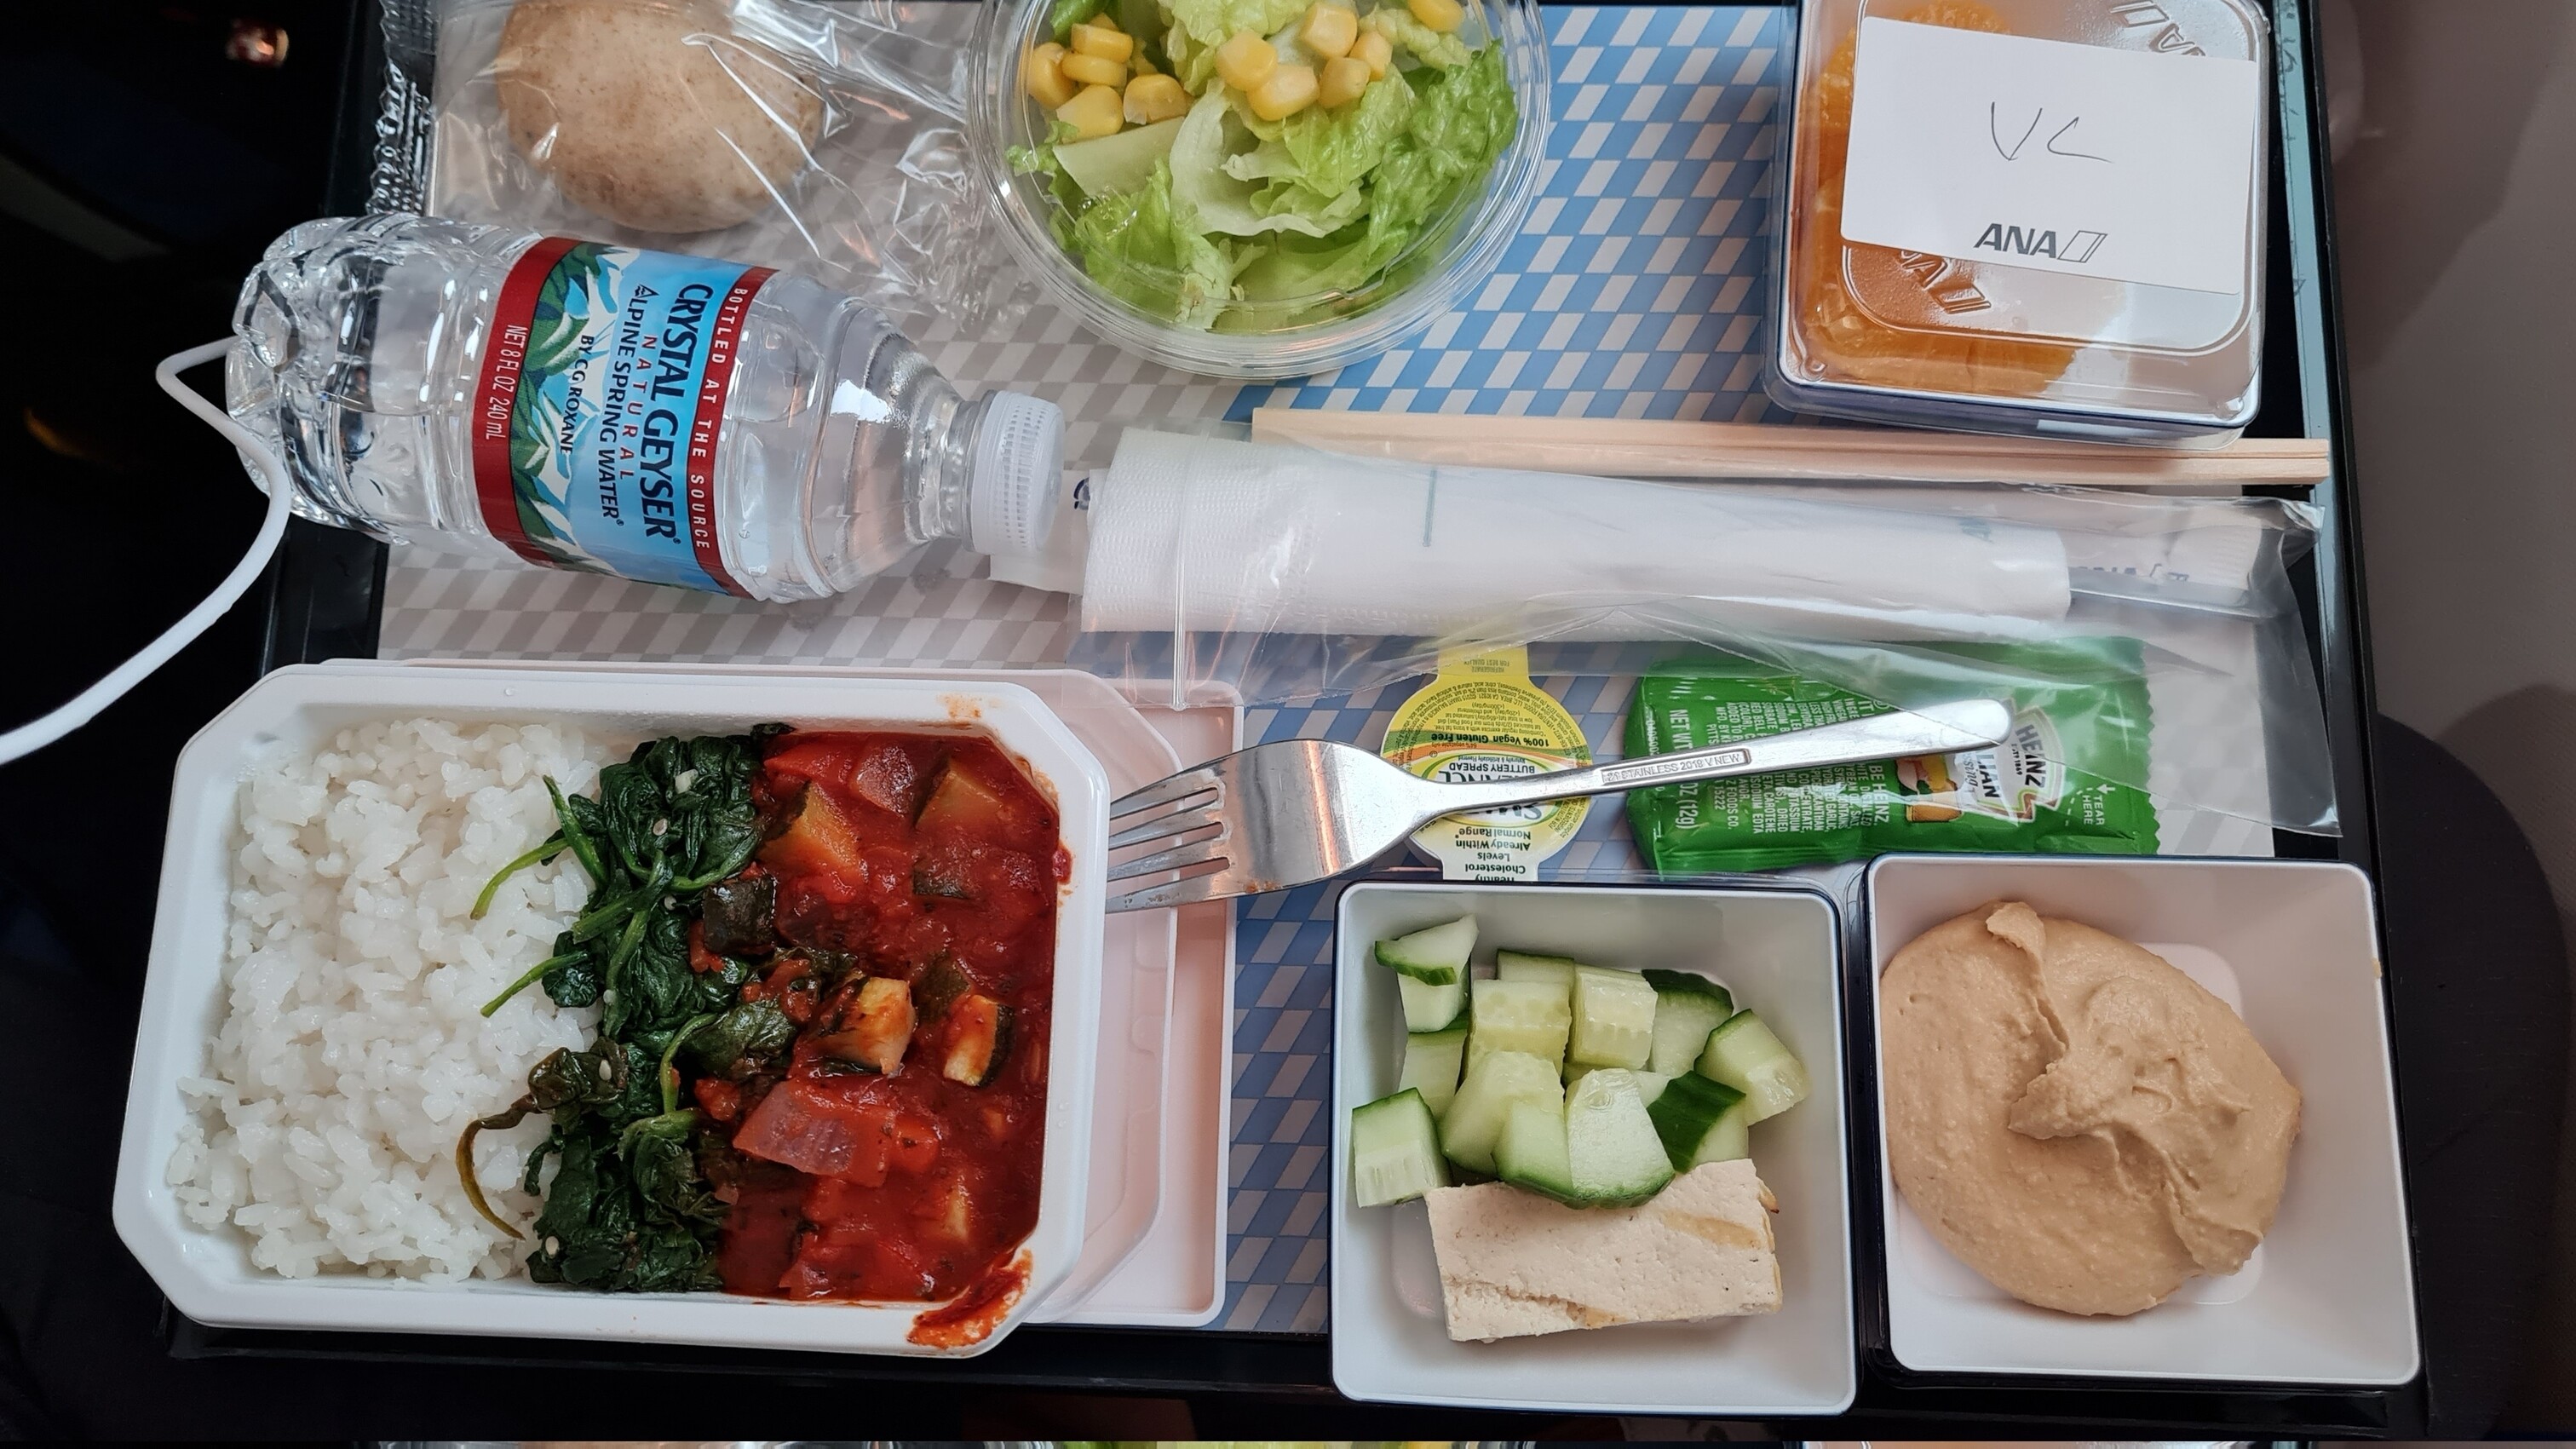 First meal. From top left: bread, salad, orange slices, hummus, dice cucumber with tofu, and ratatouille with spinach and rice. Tiny Häagen-Dazs dessert not pictured.